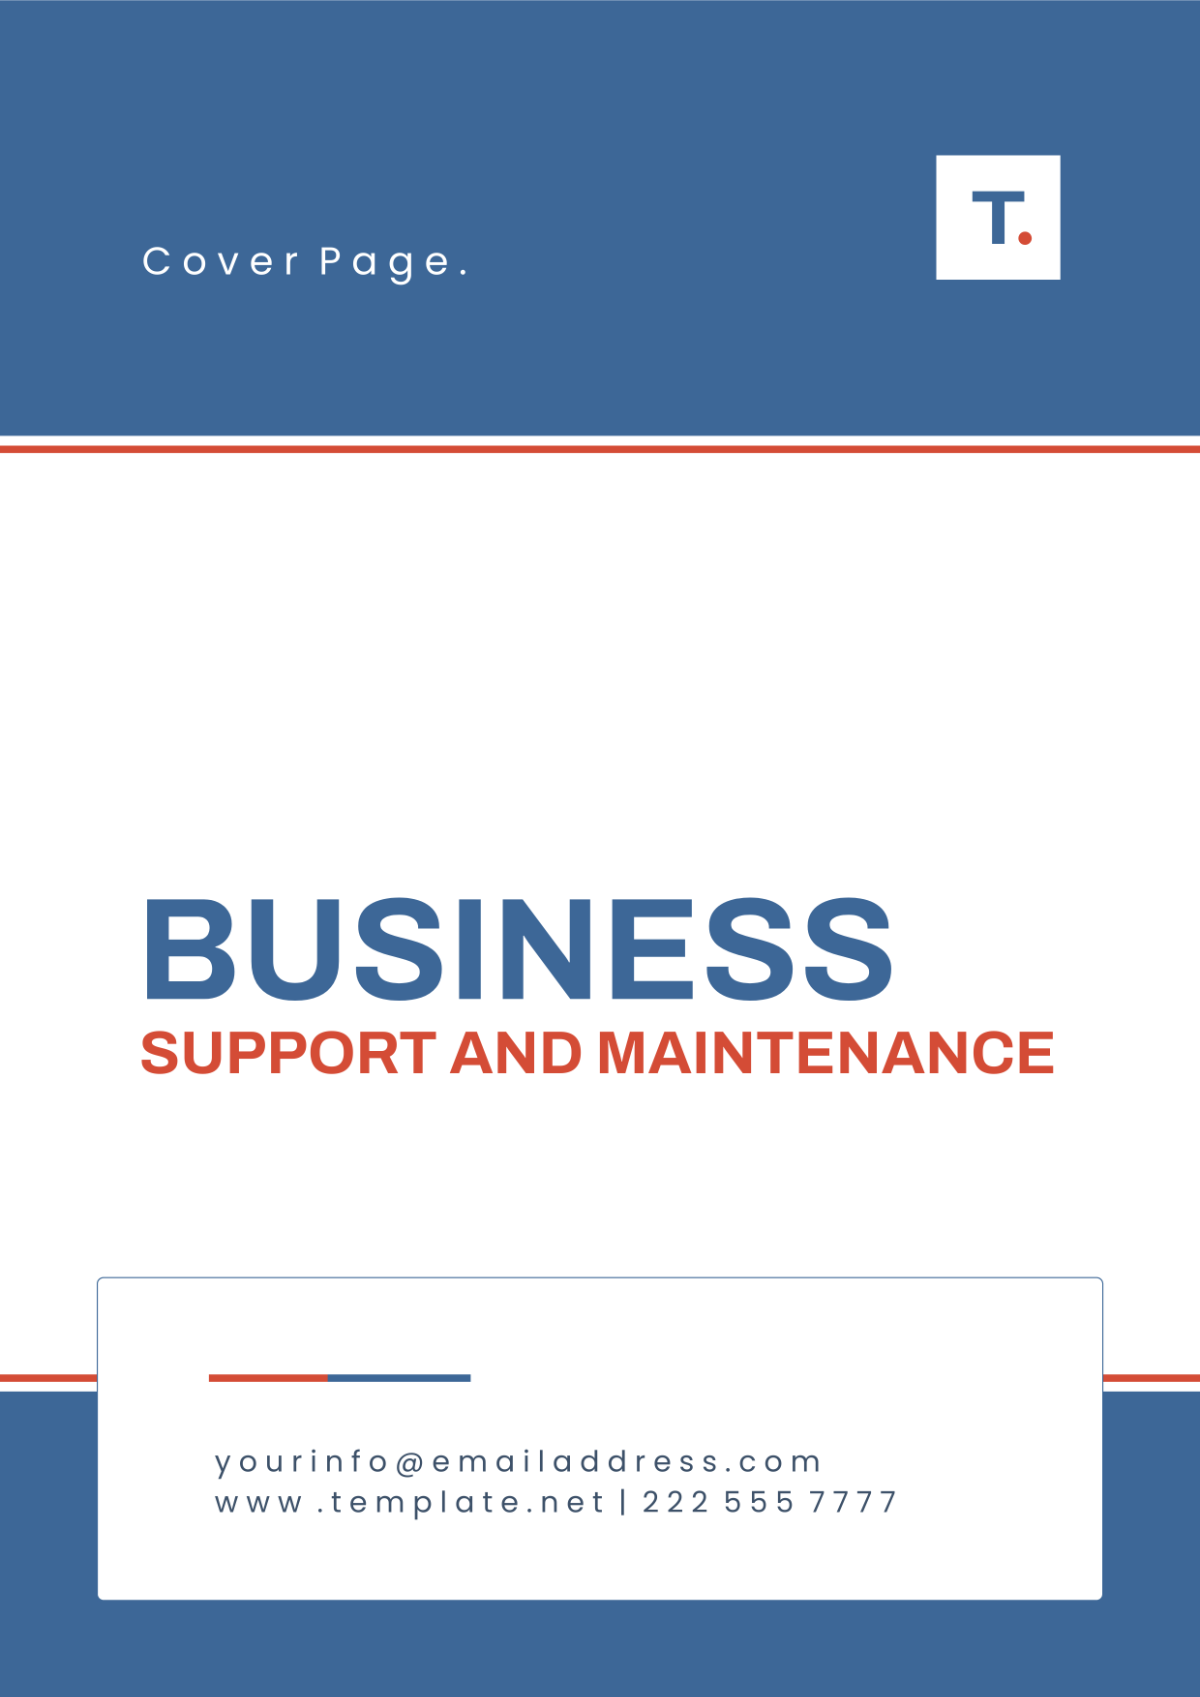 Business Support and Maintenance Cover Page